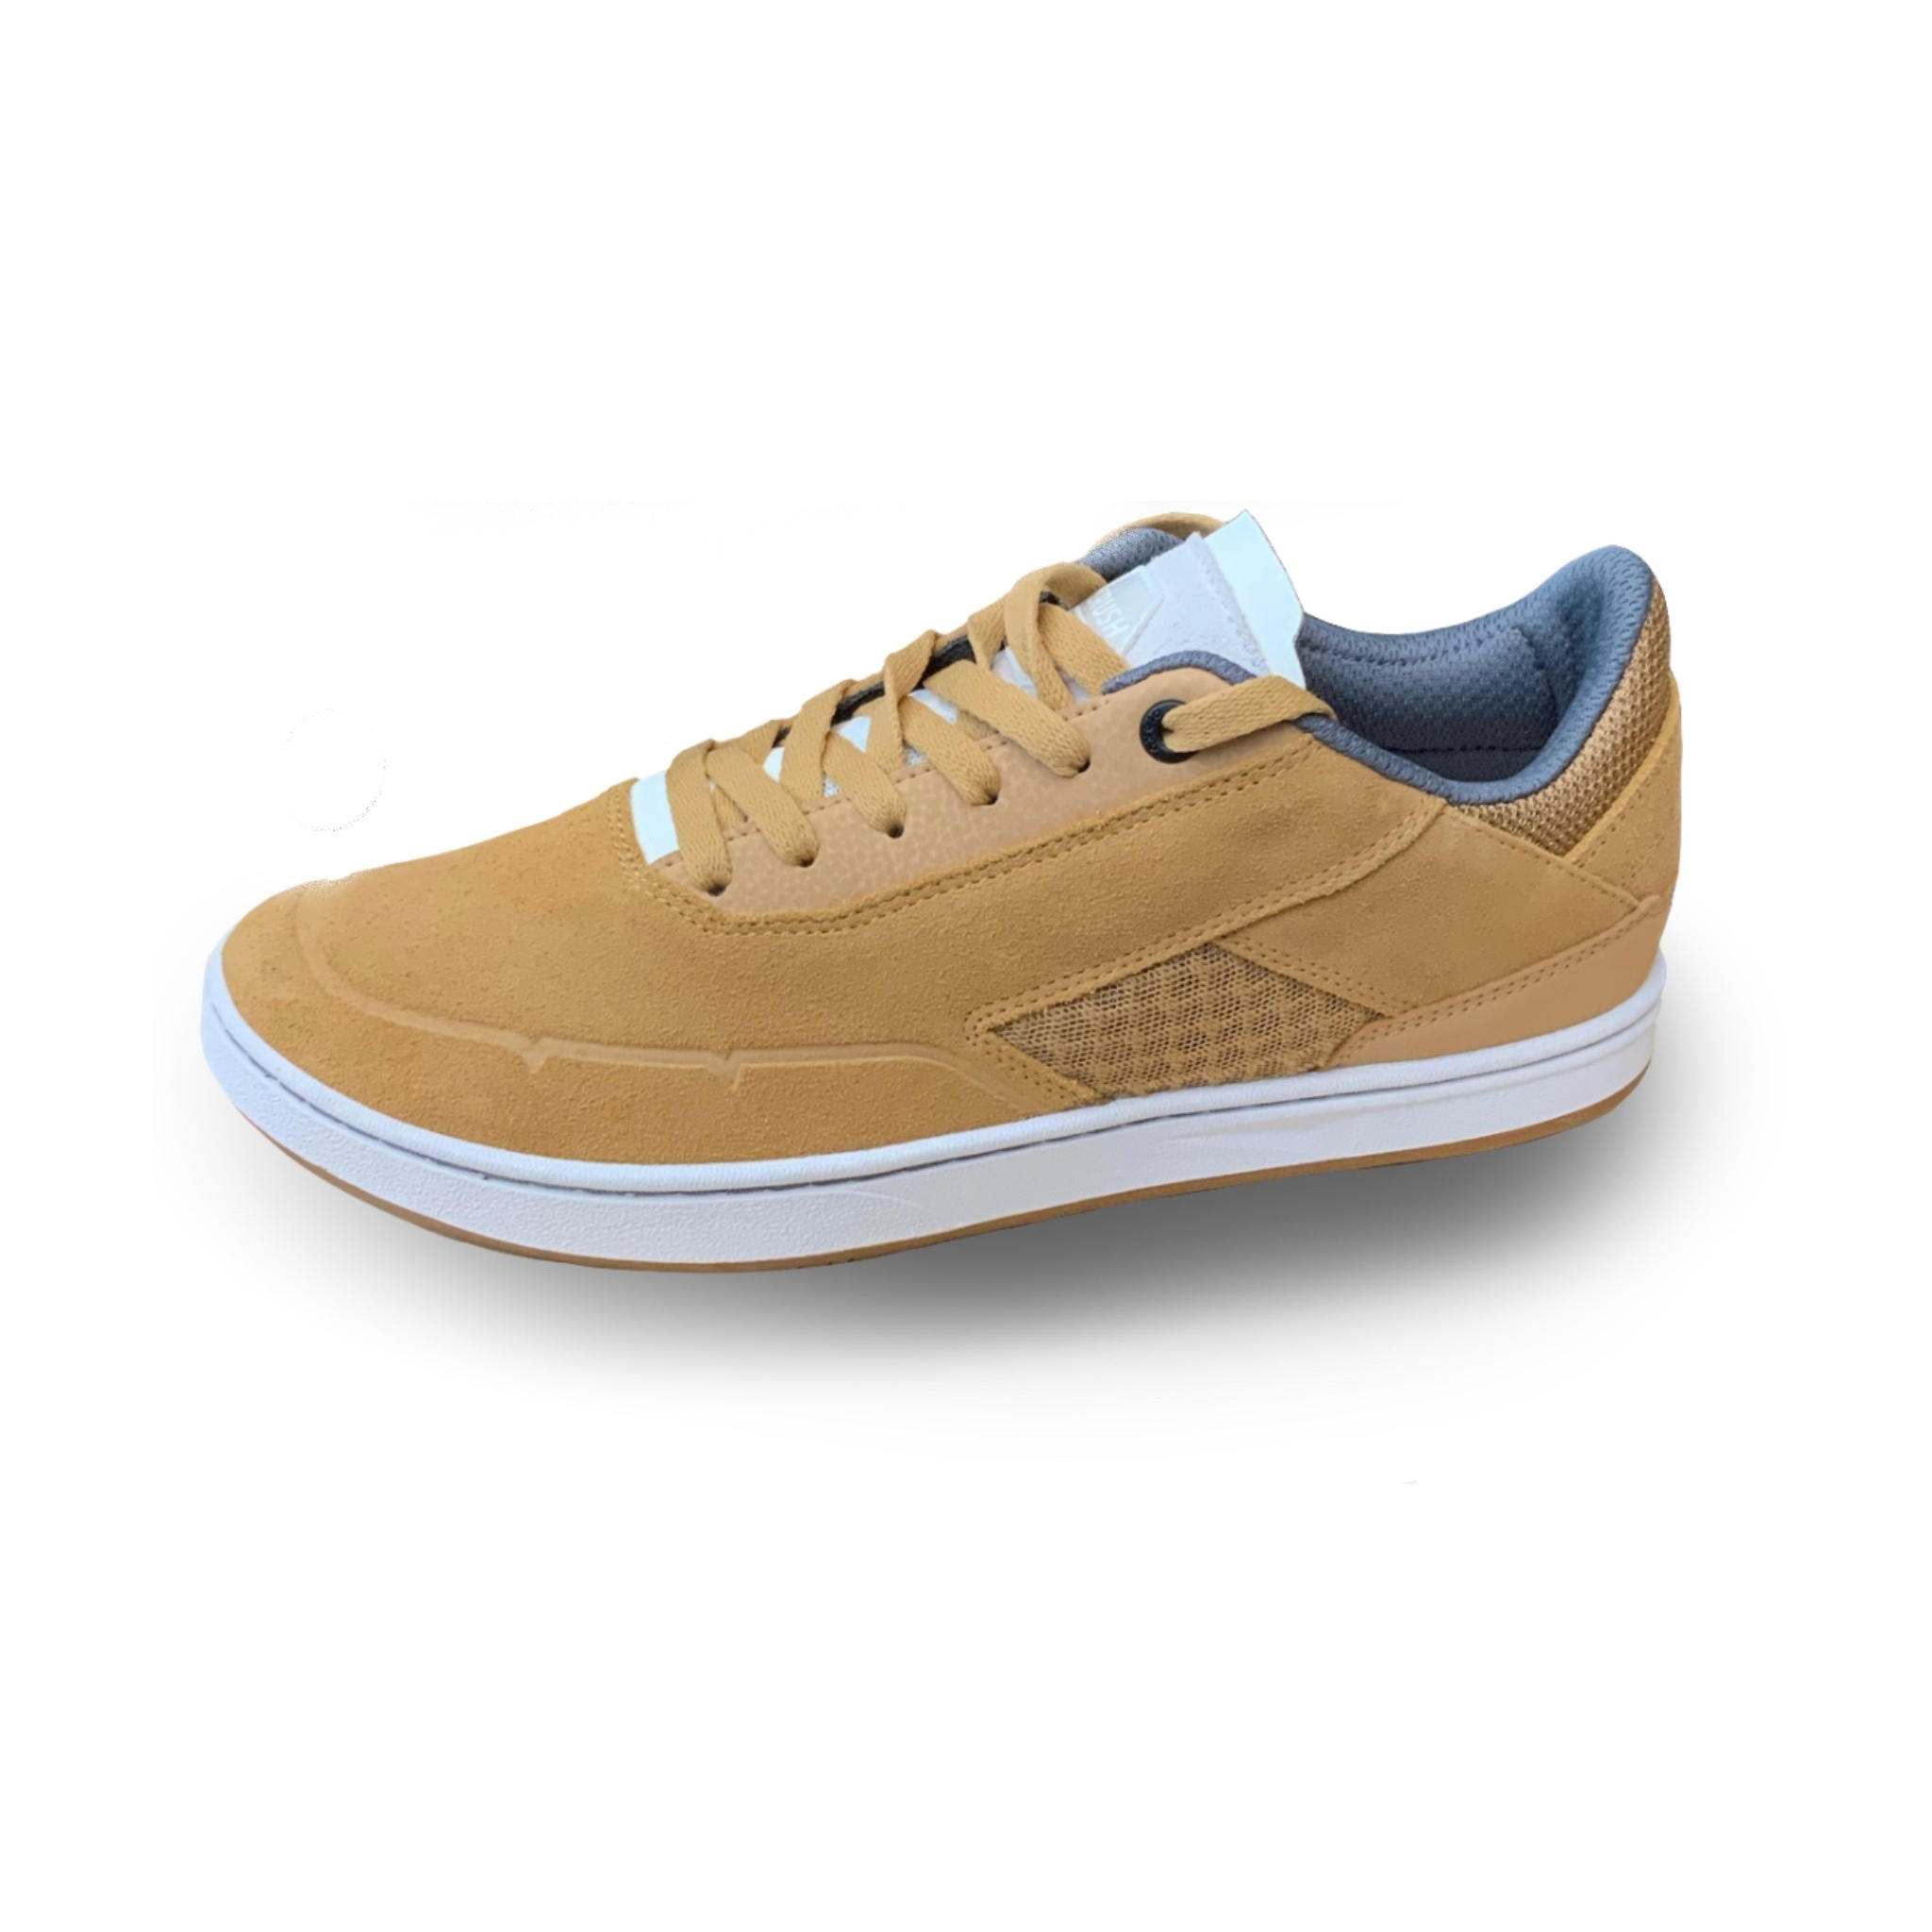 Adult Low-Top Cupsole Skate Shoes Crush 500 - Ochre/White 16/16